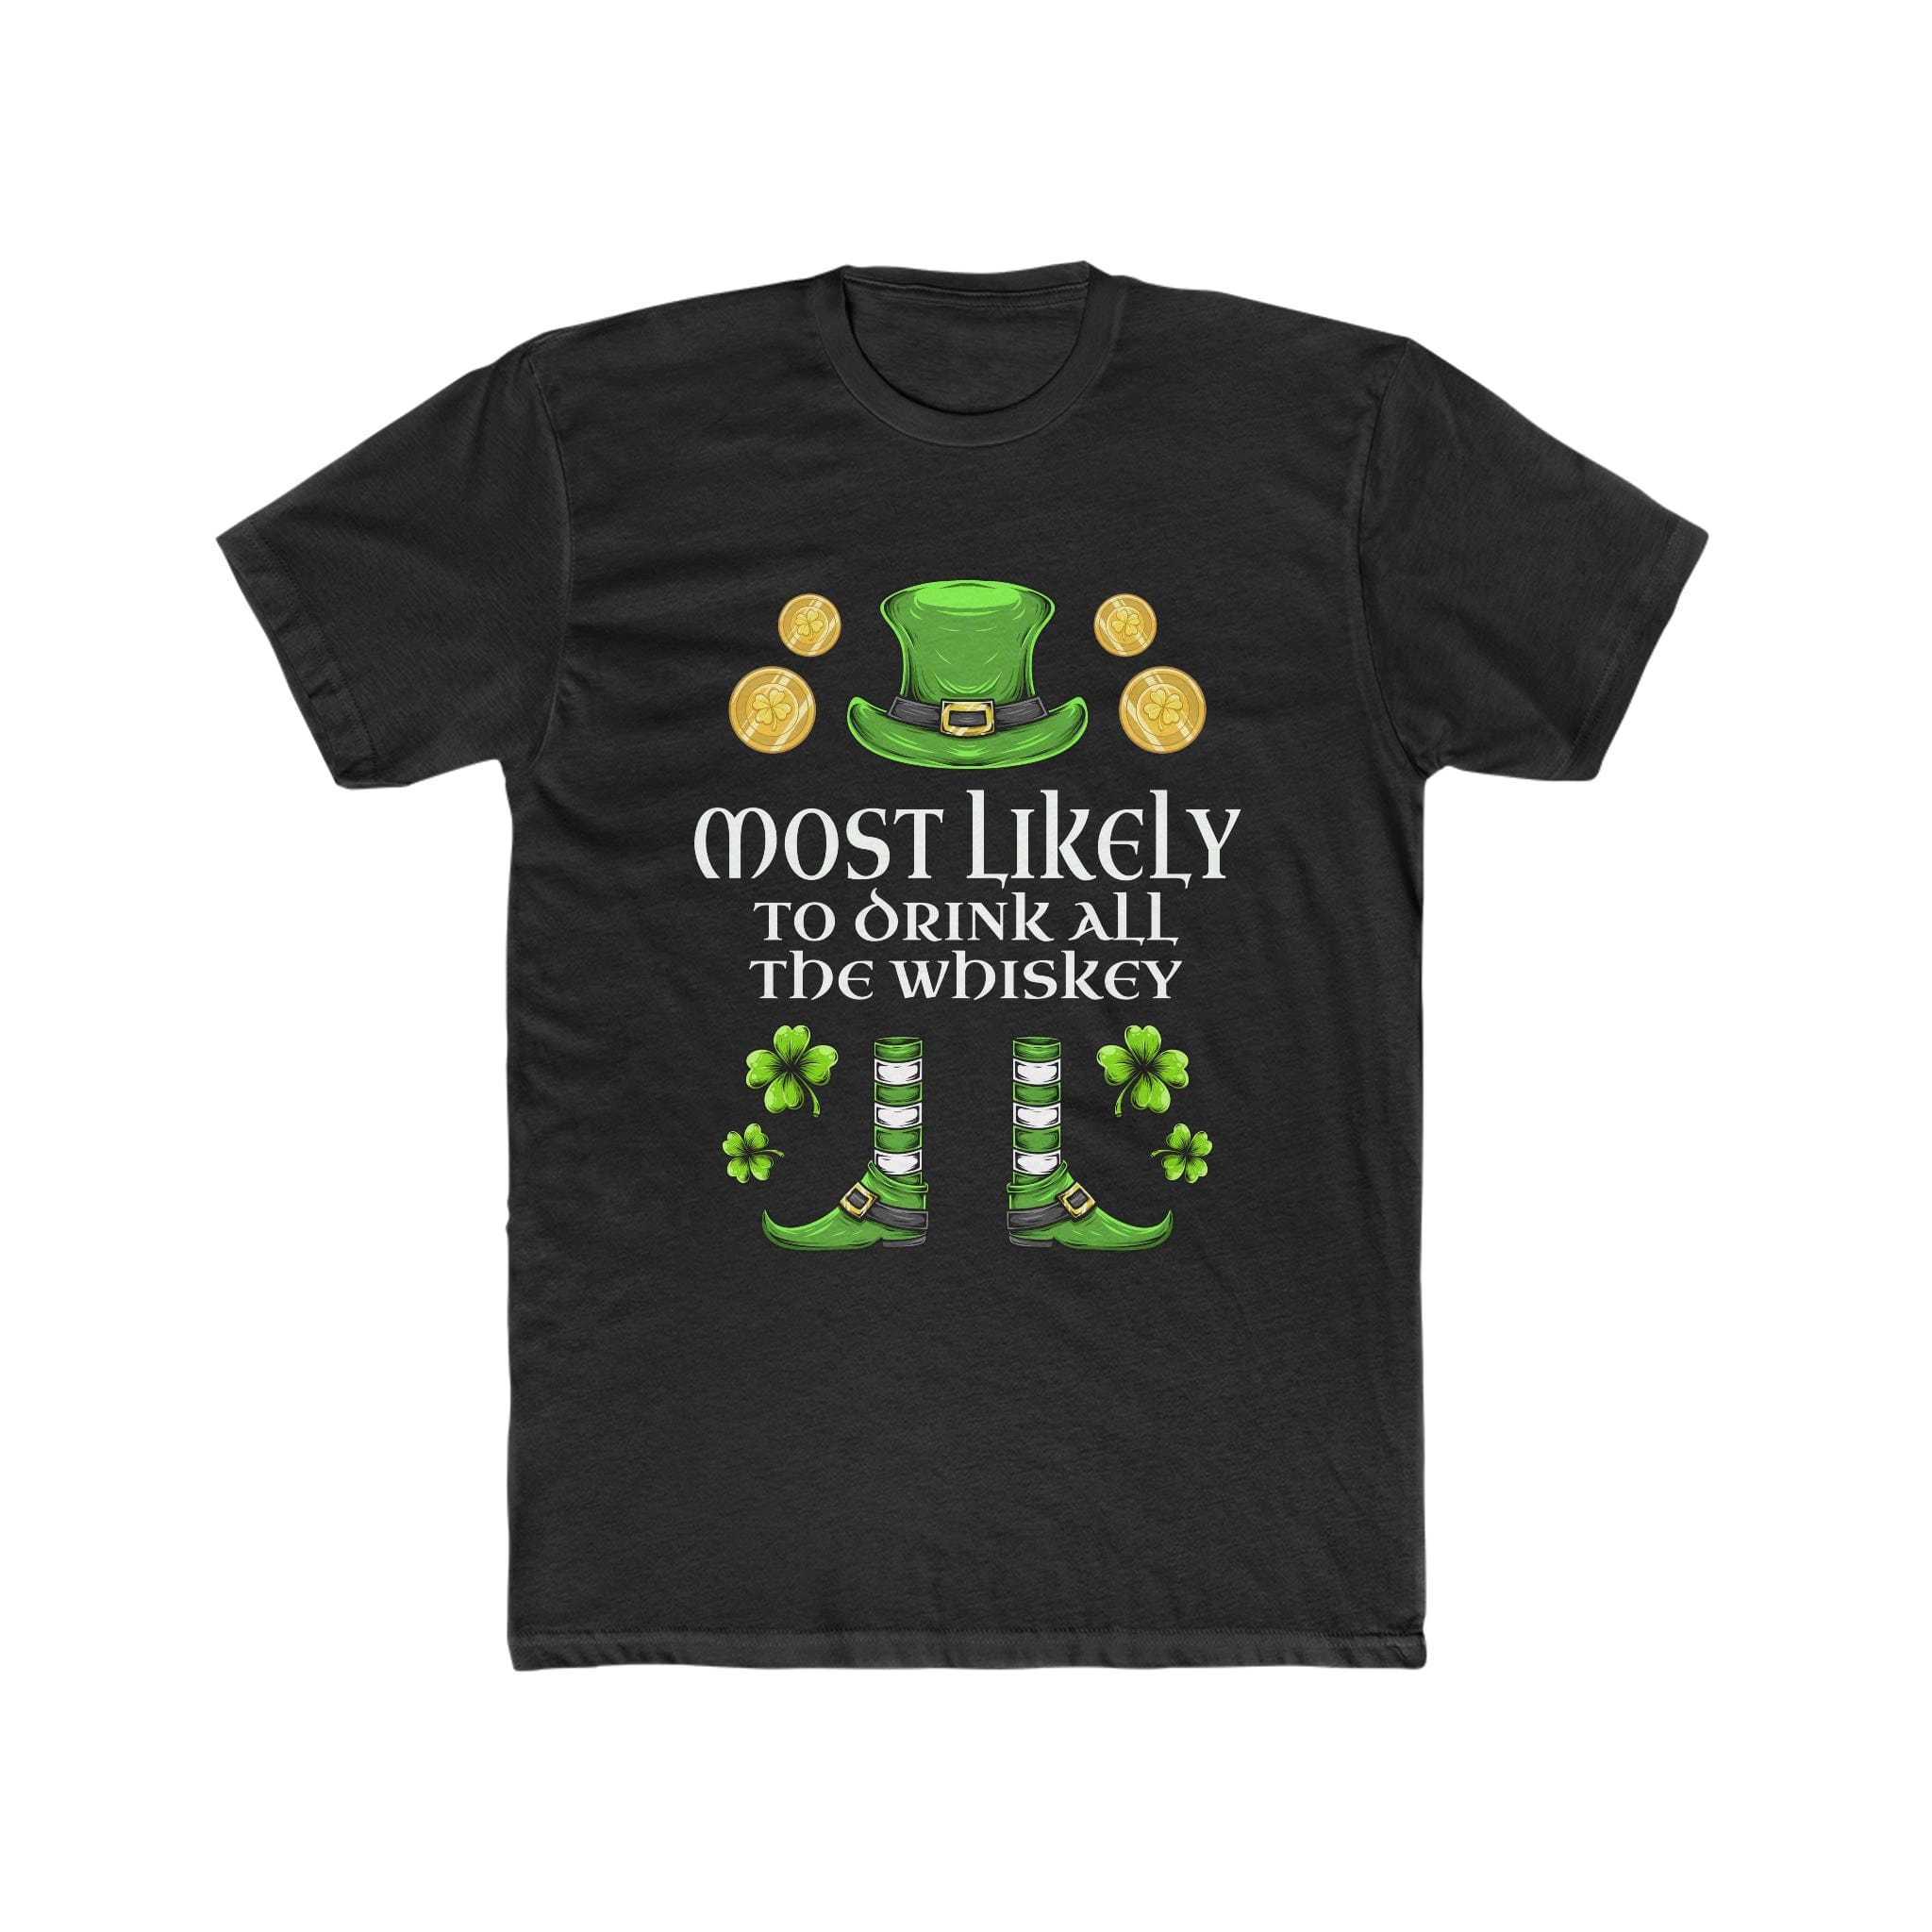 Most likely TO DRINK ALL THE WHISKEY Premium Unisex Shirt